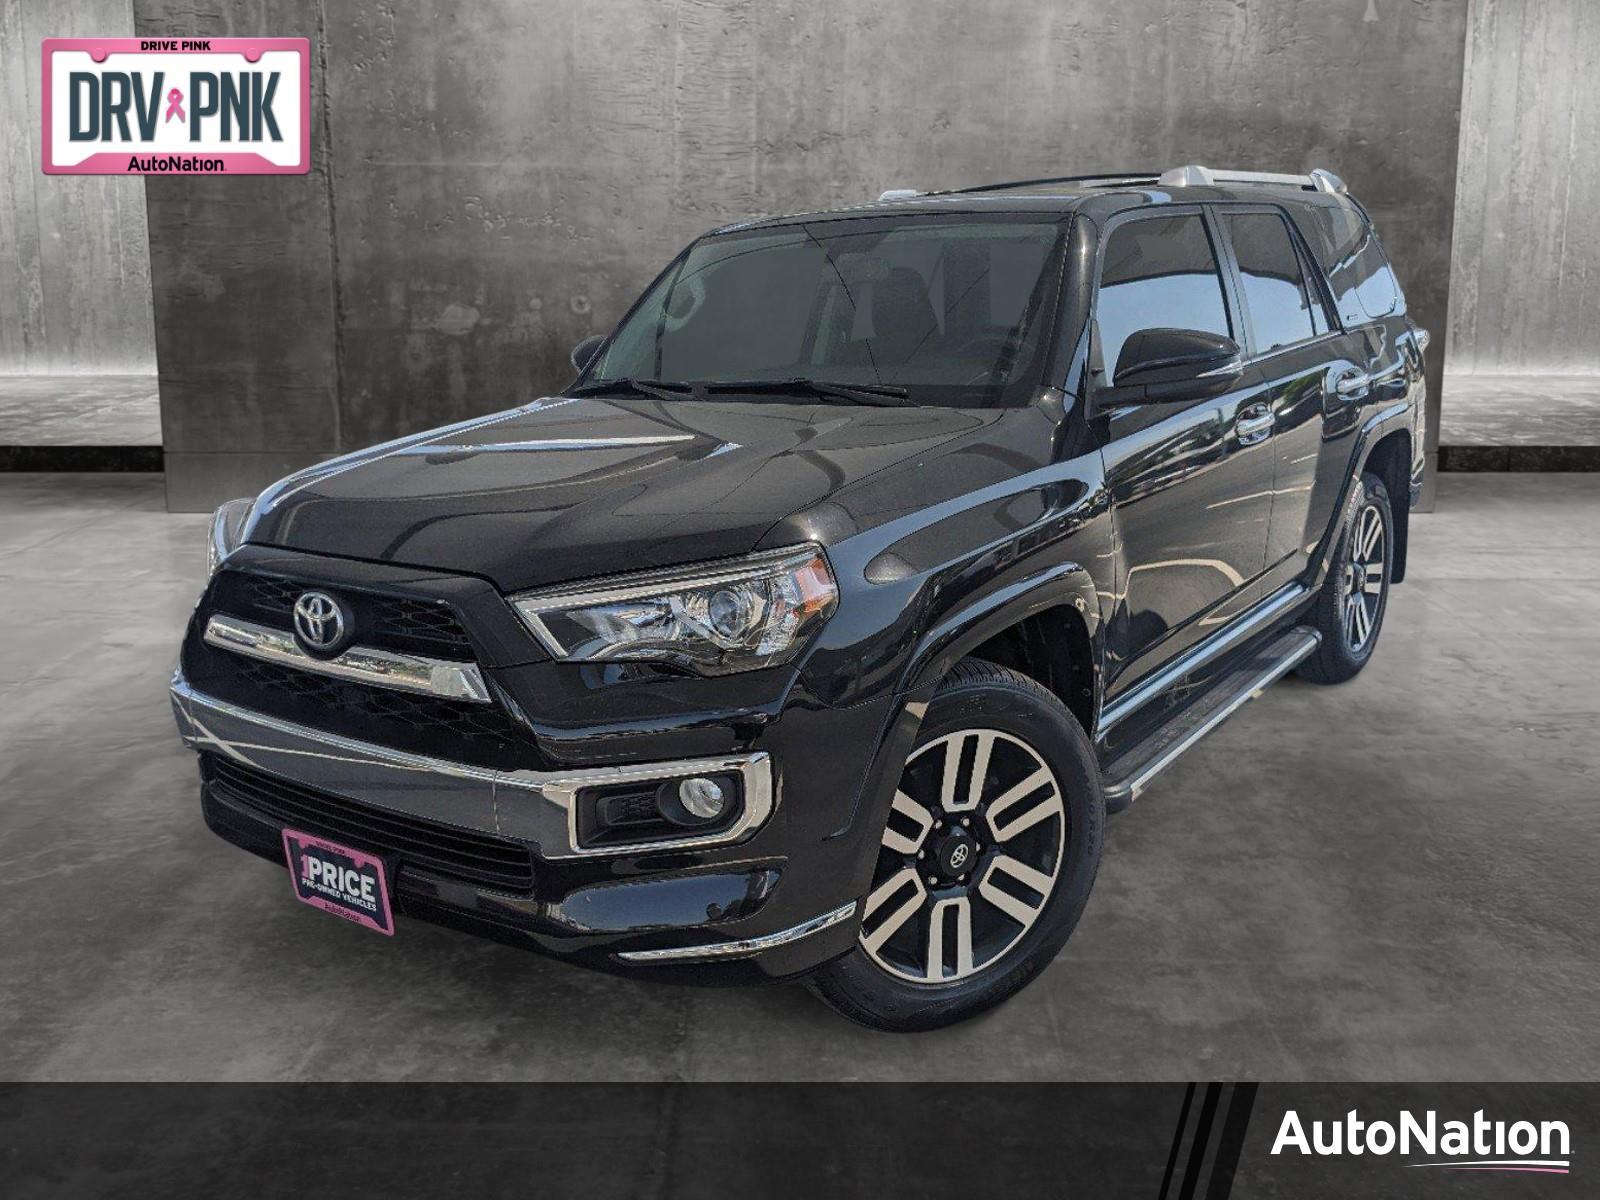 2019 Toyota 4Runner Reset Maintenance Light: Clearing the Way to Smooth Driving